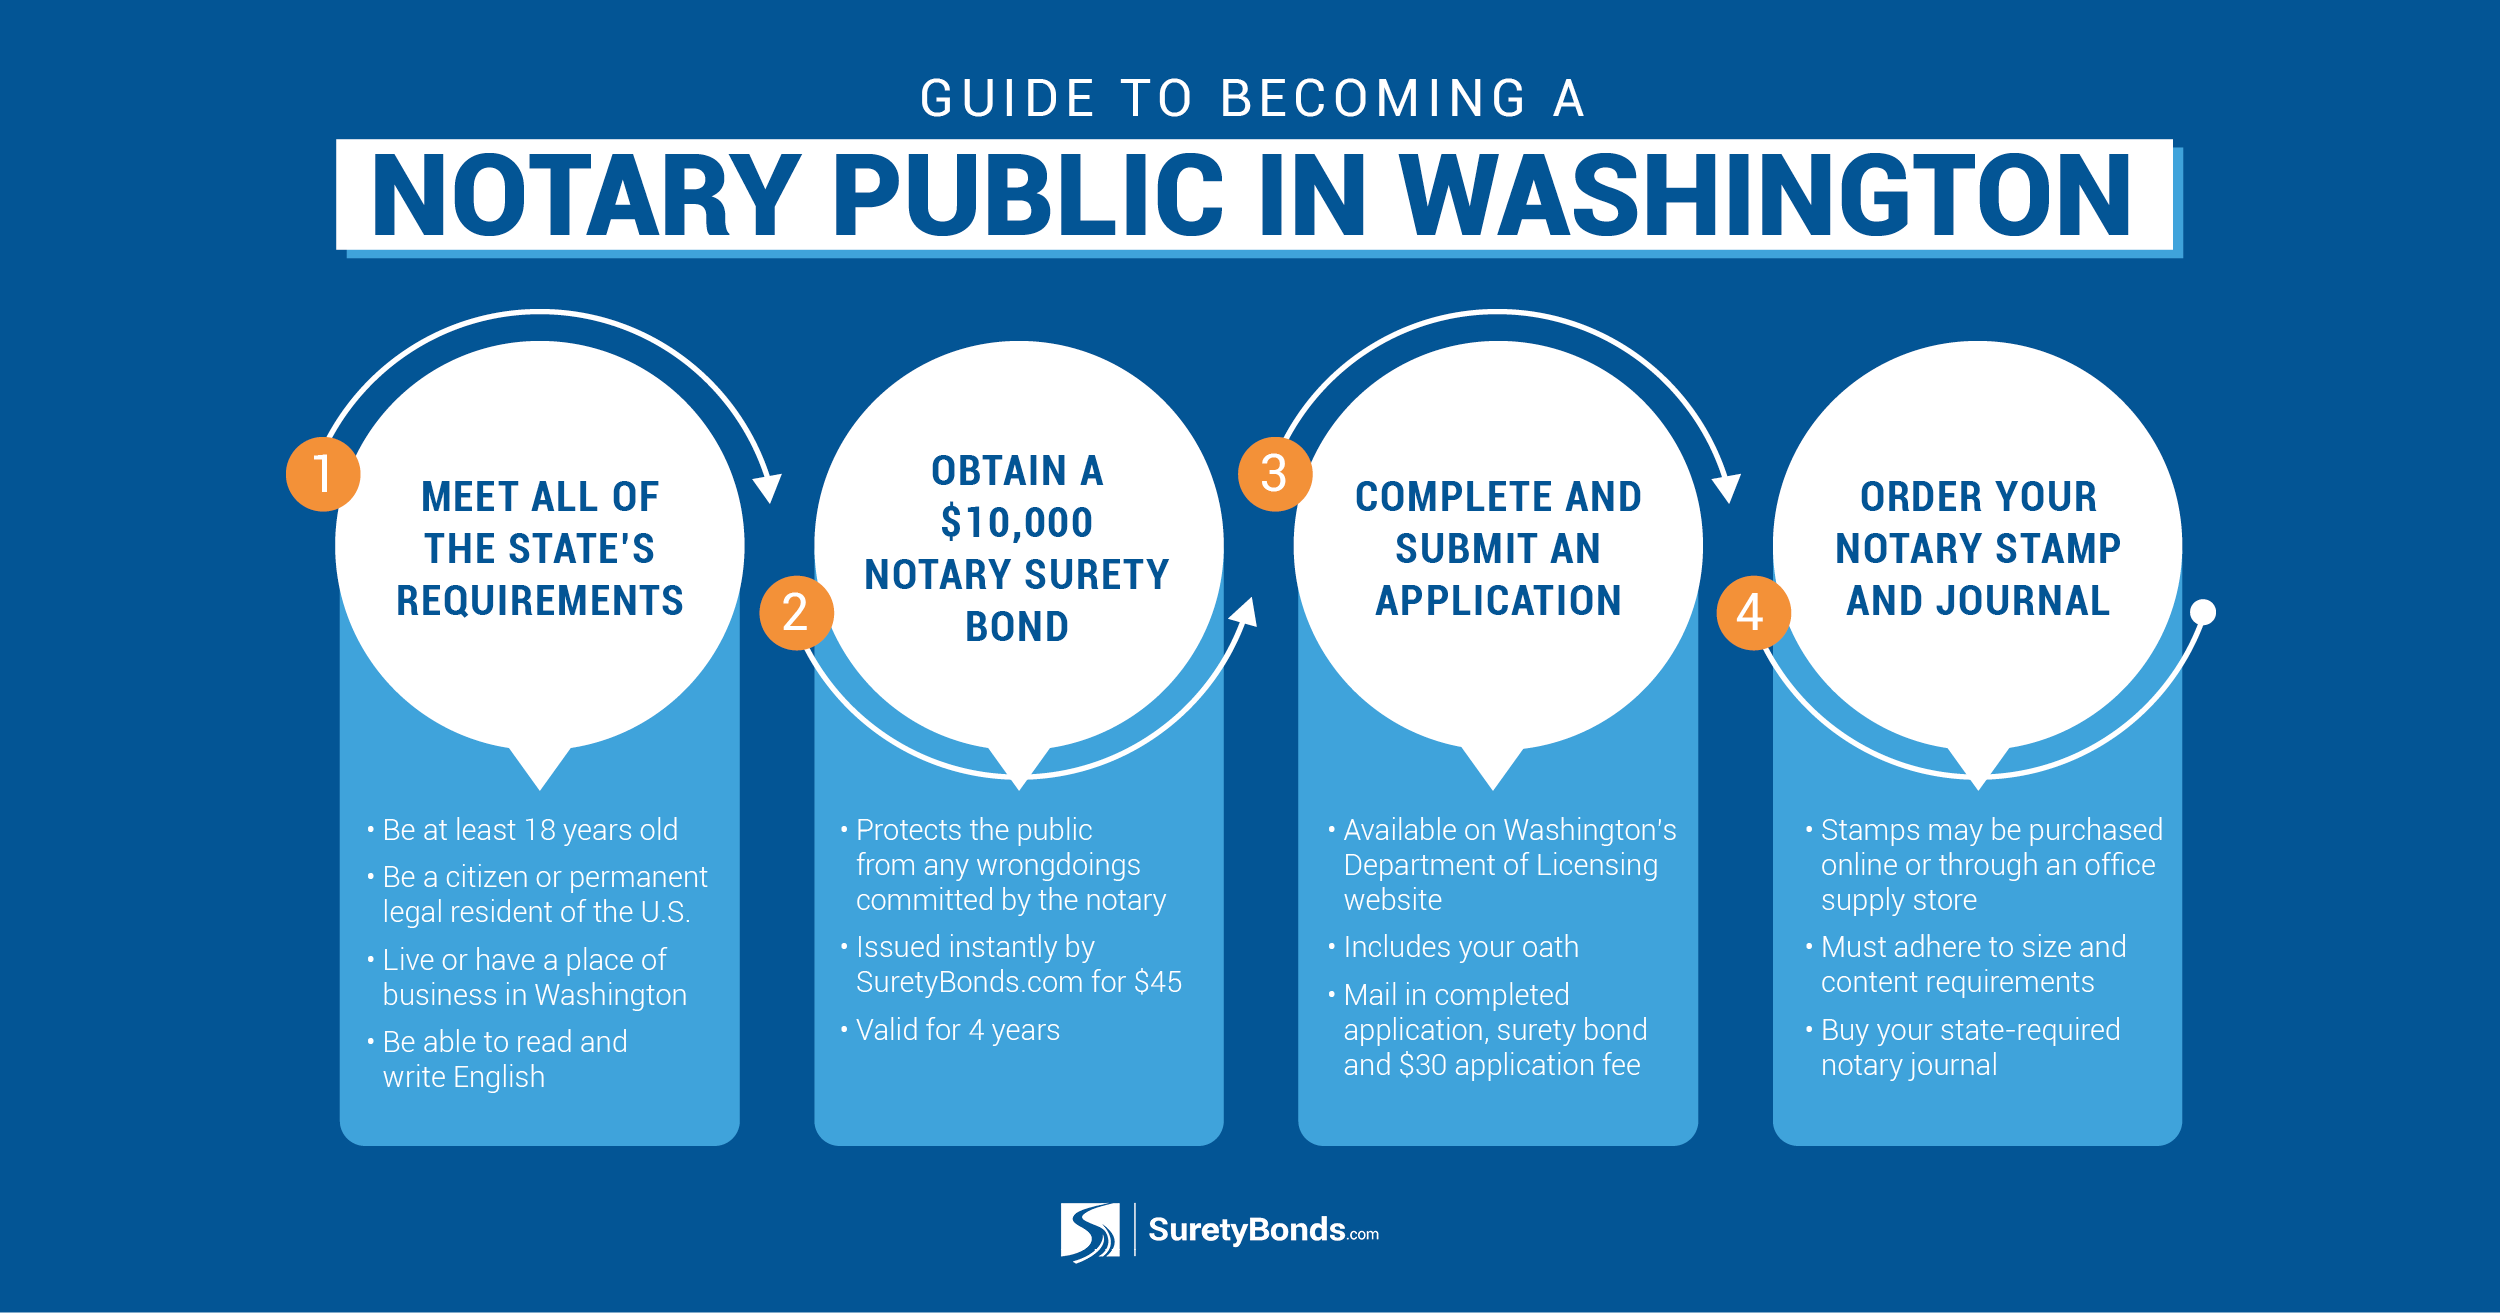 Meet Washington requirements, obtain a $10,000 surety bond, submit an application, and order your notary stamp and journal.